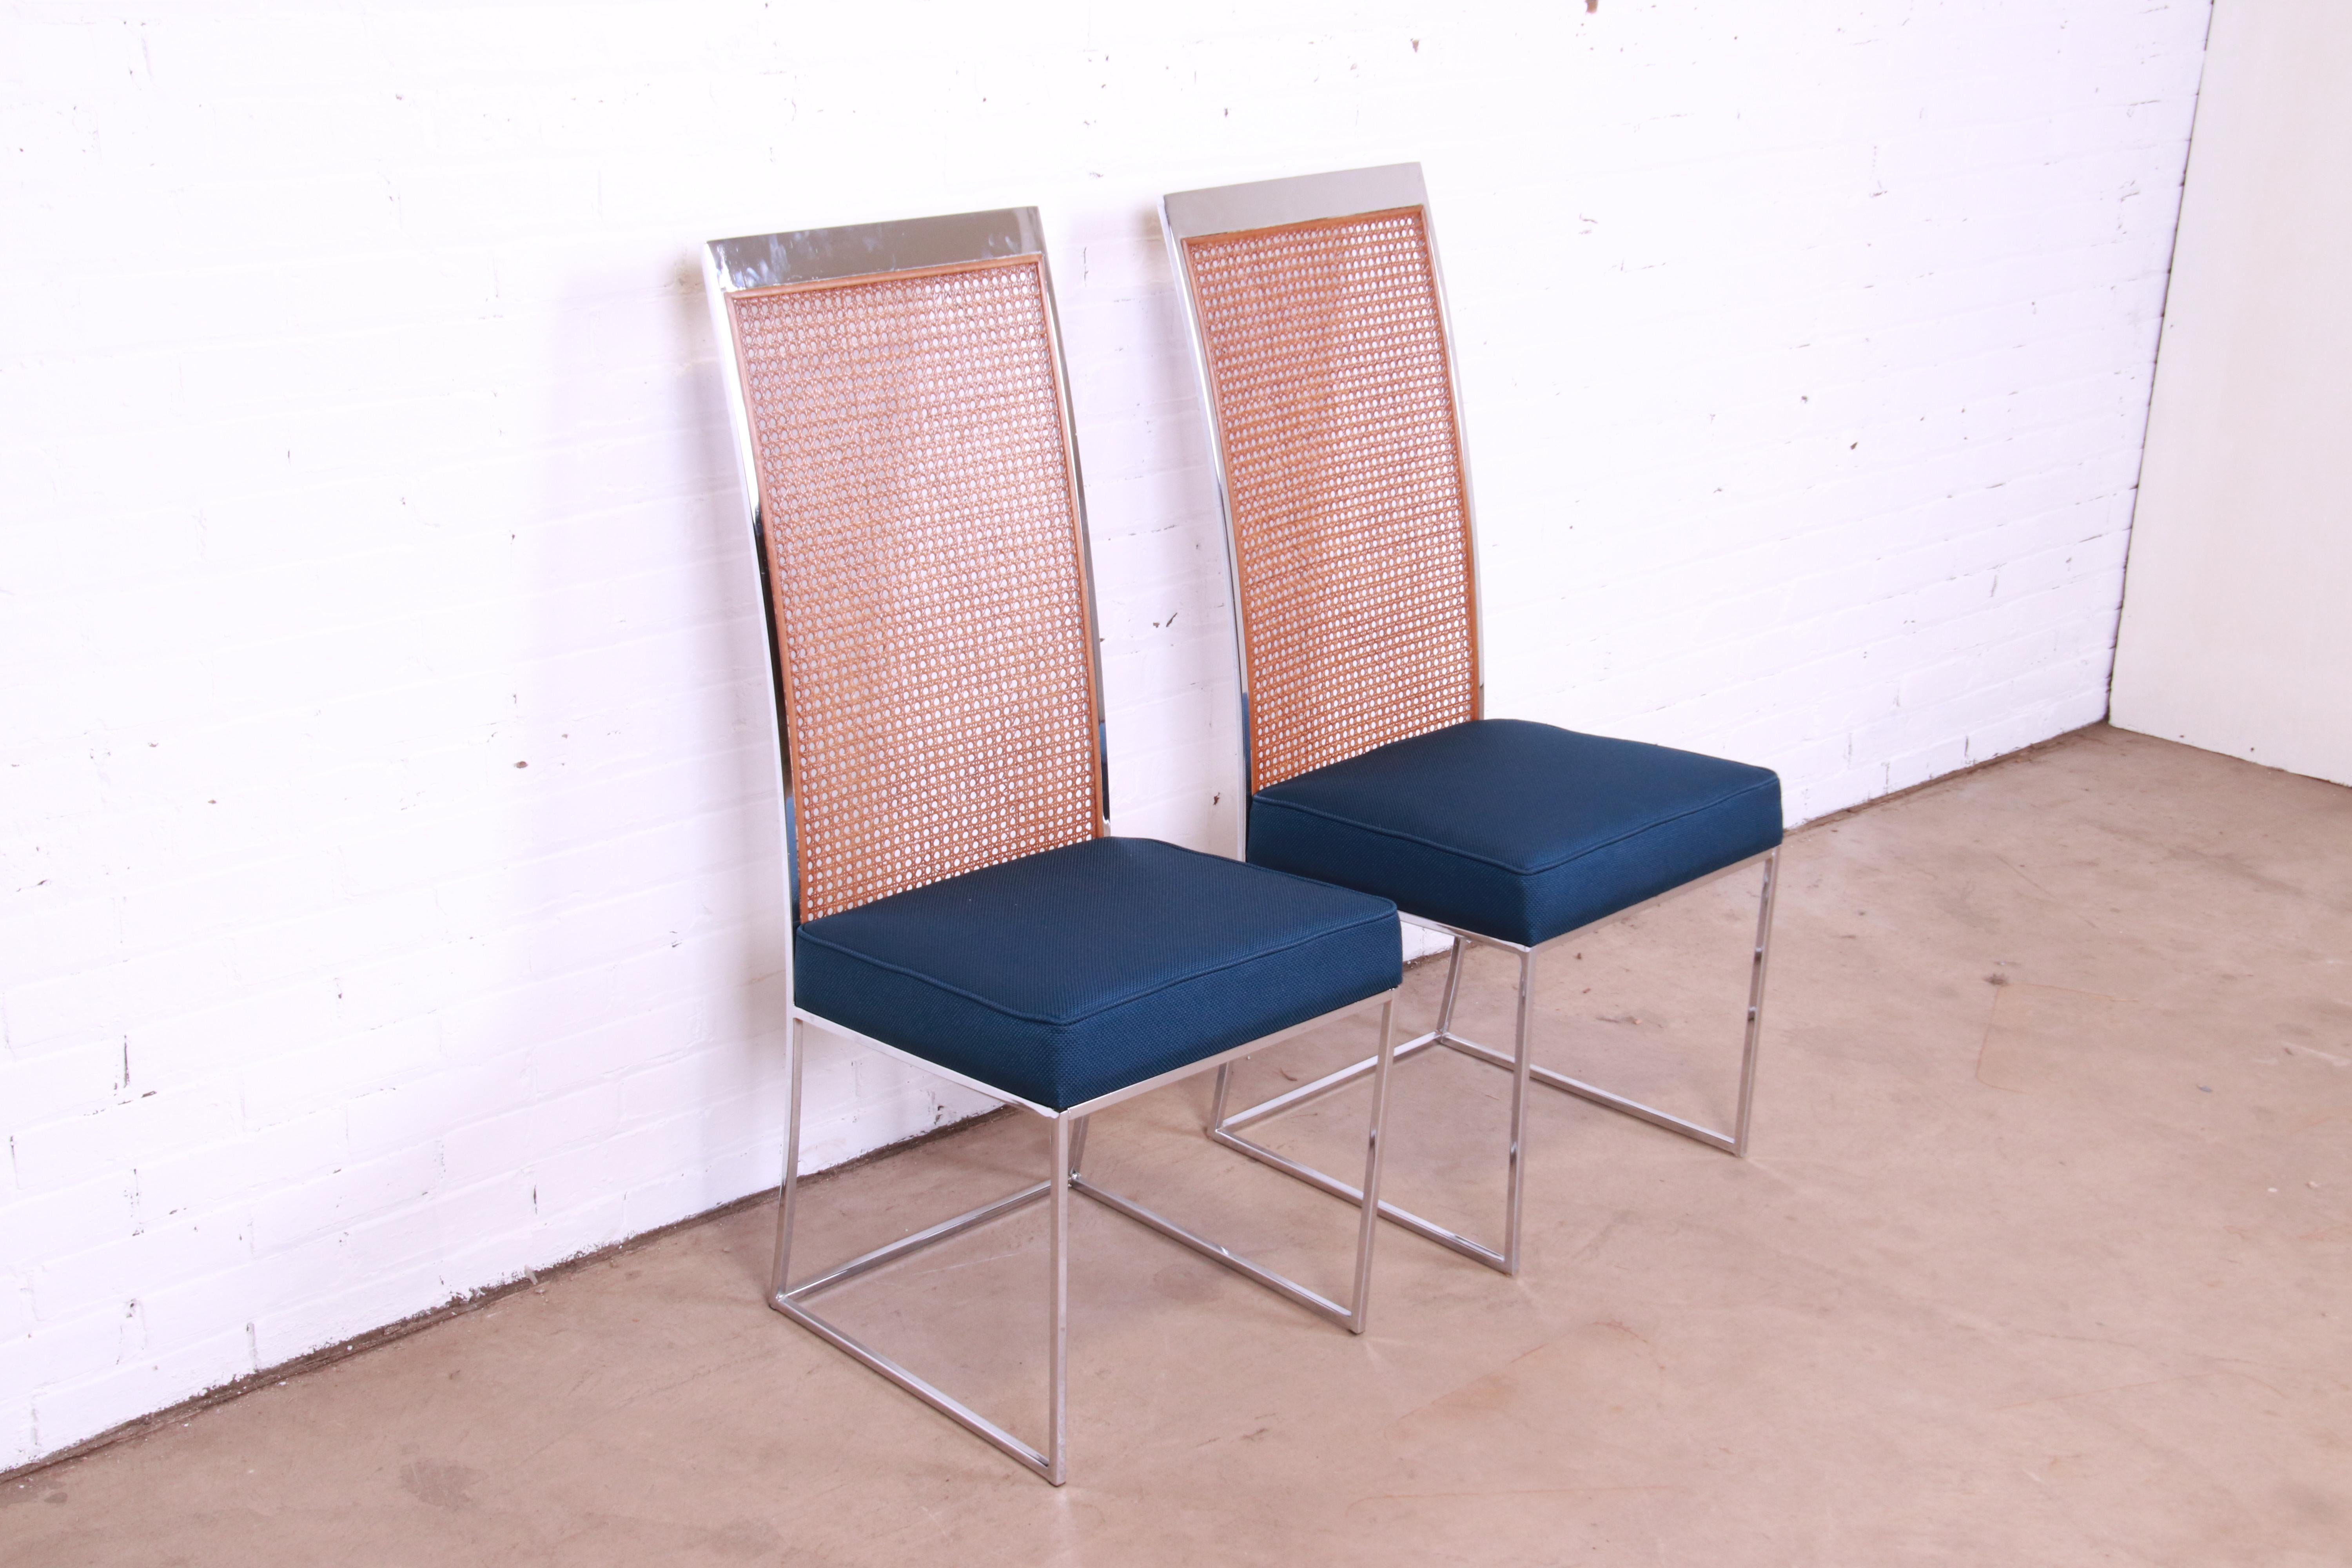 Late 20th Century Milo Baughman for Thayer Coggin Chrome and Cane High Back Dining Chairs, Pair